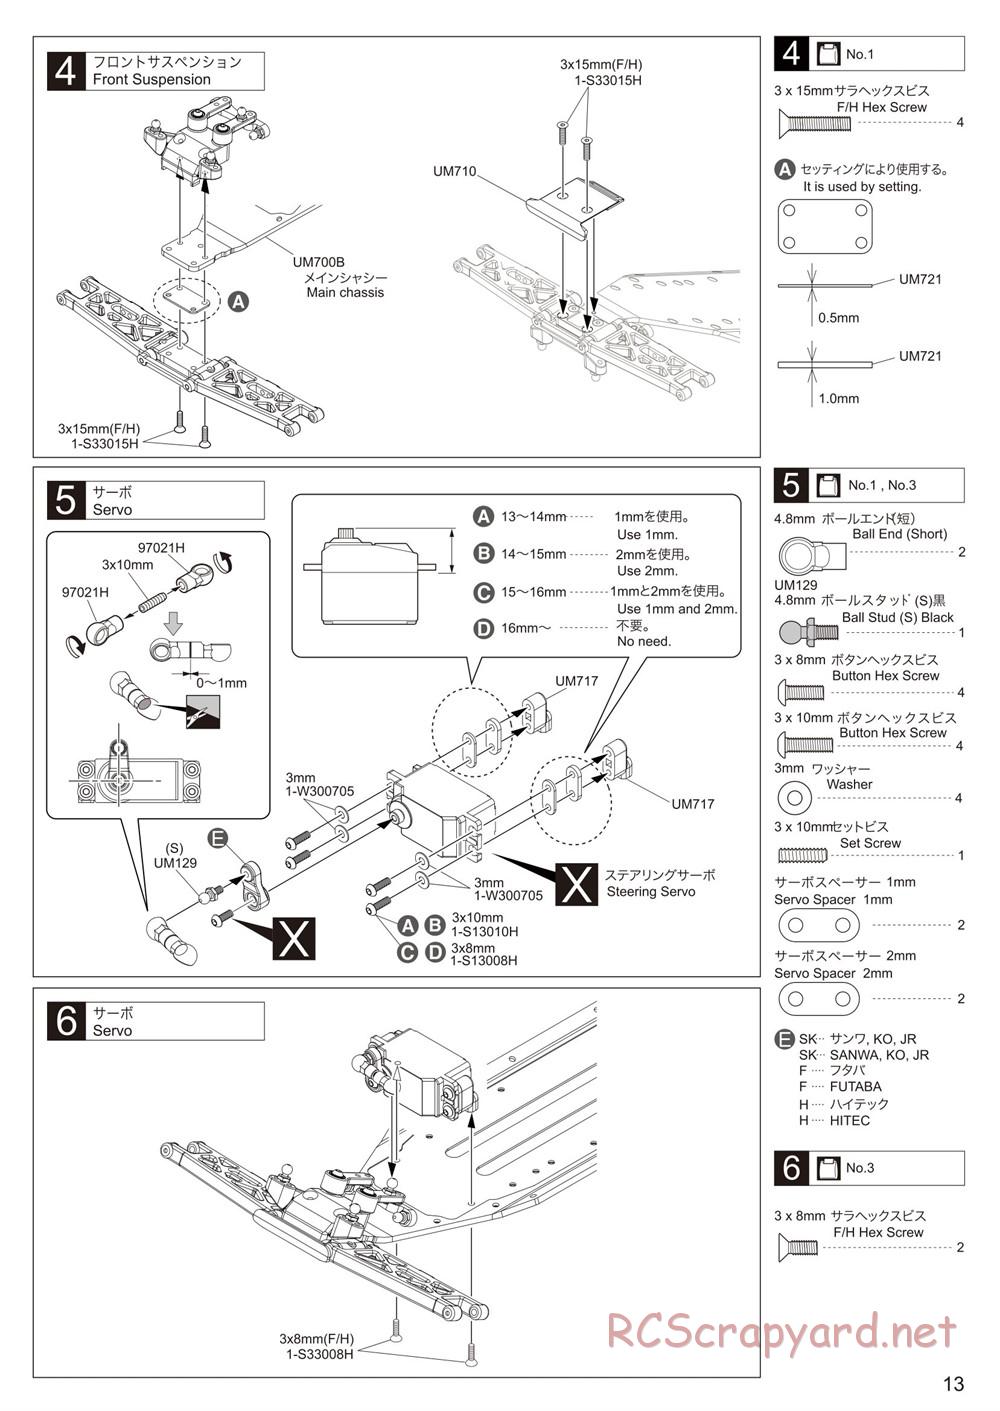 Kyosho - Ultima RB6 (2015) - Manual - Page 13